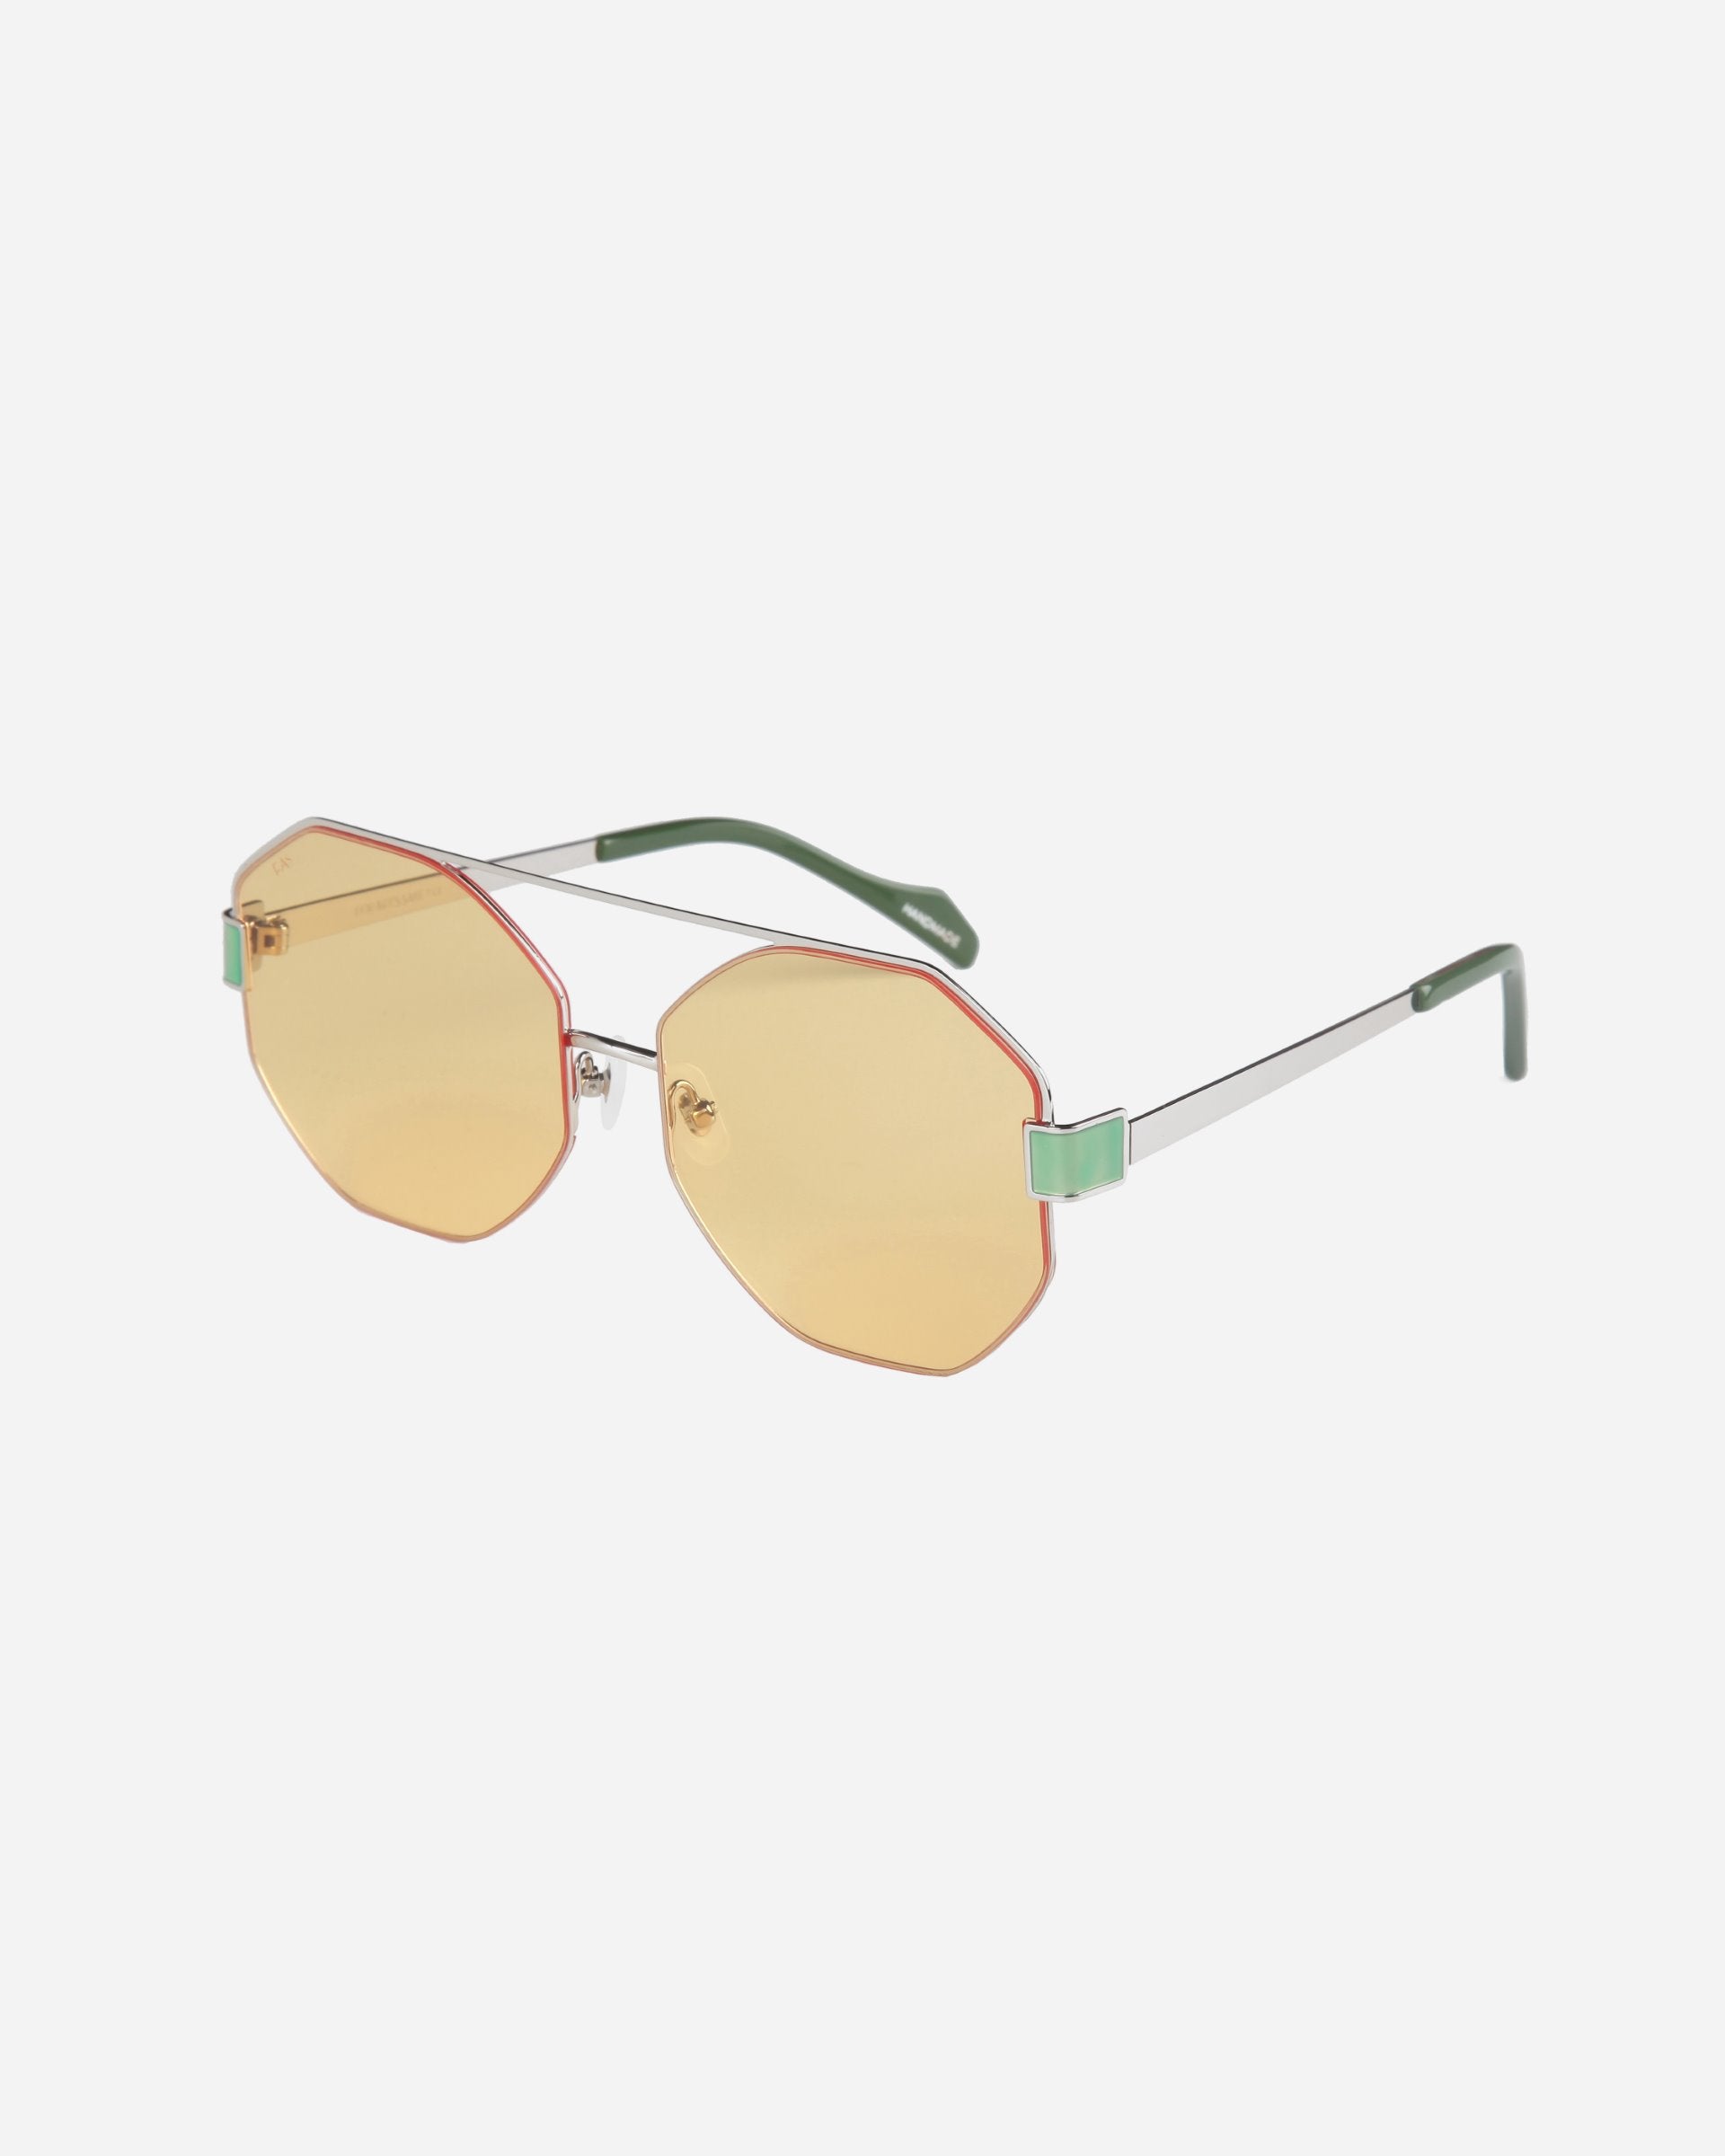 A pair of stylish For Art&#39;s Sake® Mania sunglasses with hexagonal, yellow-tinted nylon lenses, thin stainless steel frames, and green temple tips. The sunglasses have a retro vibe with a modern twist, featuring adjustable nosepads for comfort and a minimalistic design.